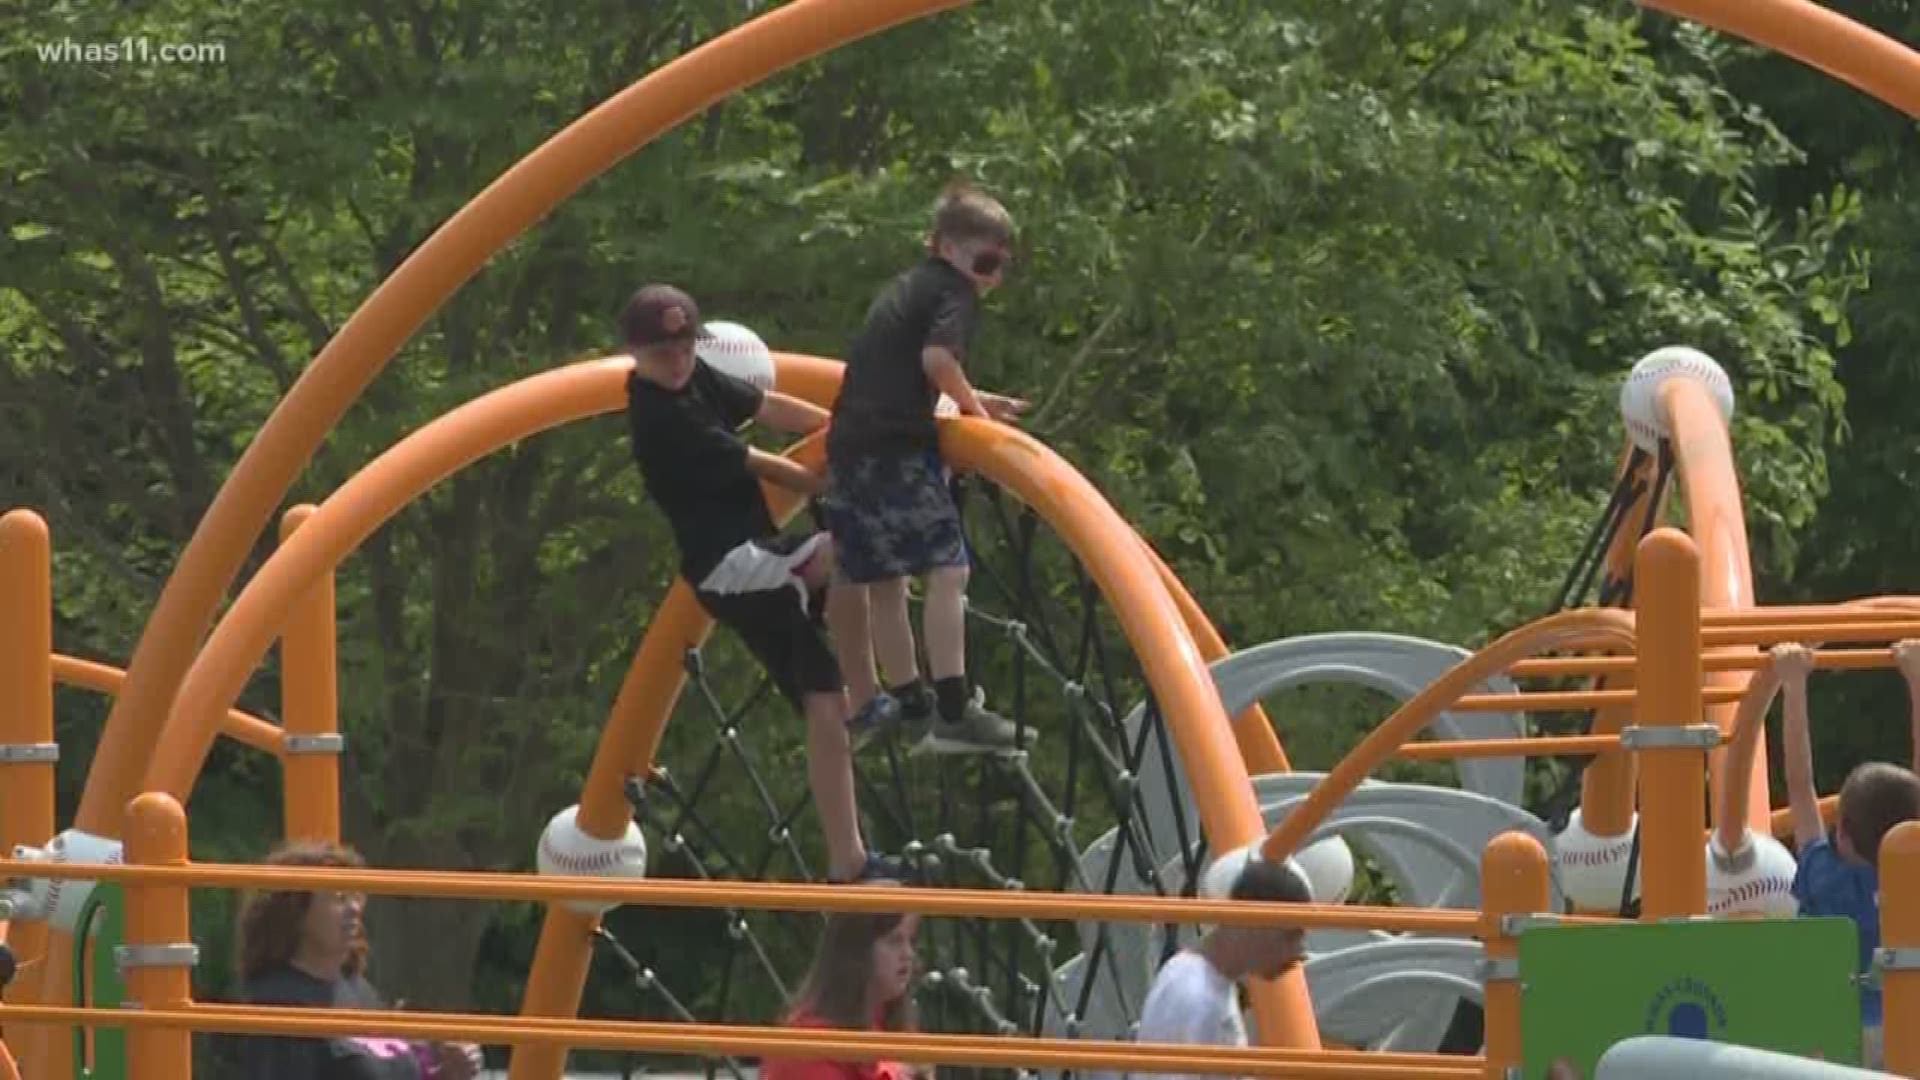 There is a new playground located on Ferndale Road, near Fern Creek Elementary School.